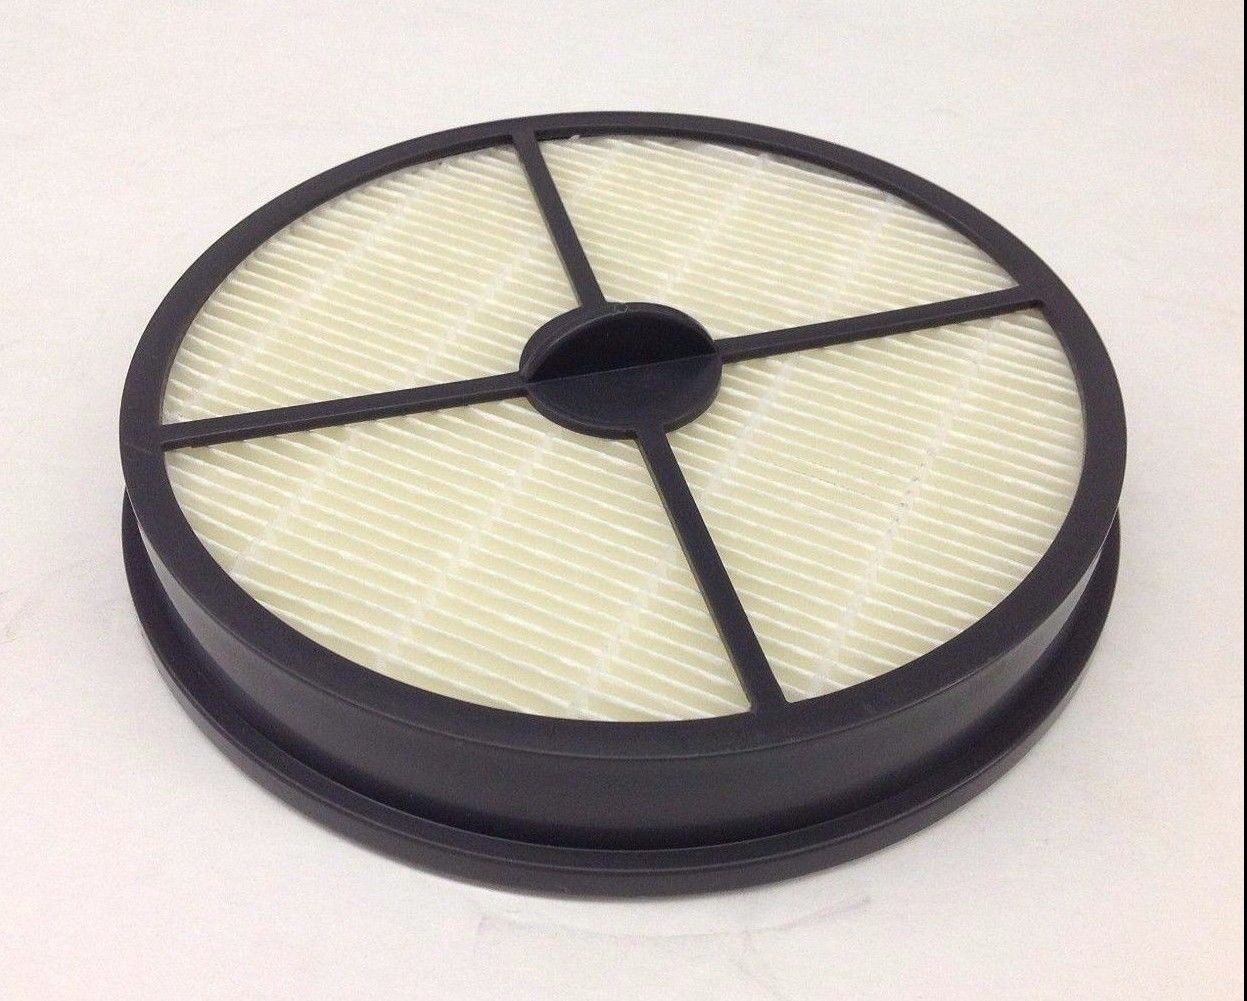 Featured image for “New Genuine Hoover Vacuum Exhaust HEPA Filter for UH72450 Air Pro 440004216”